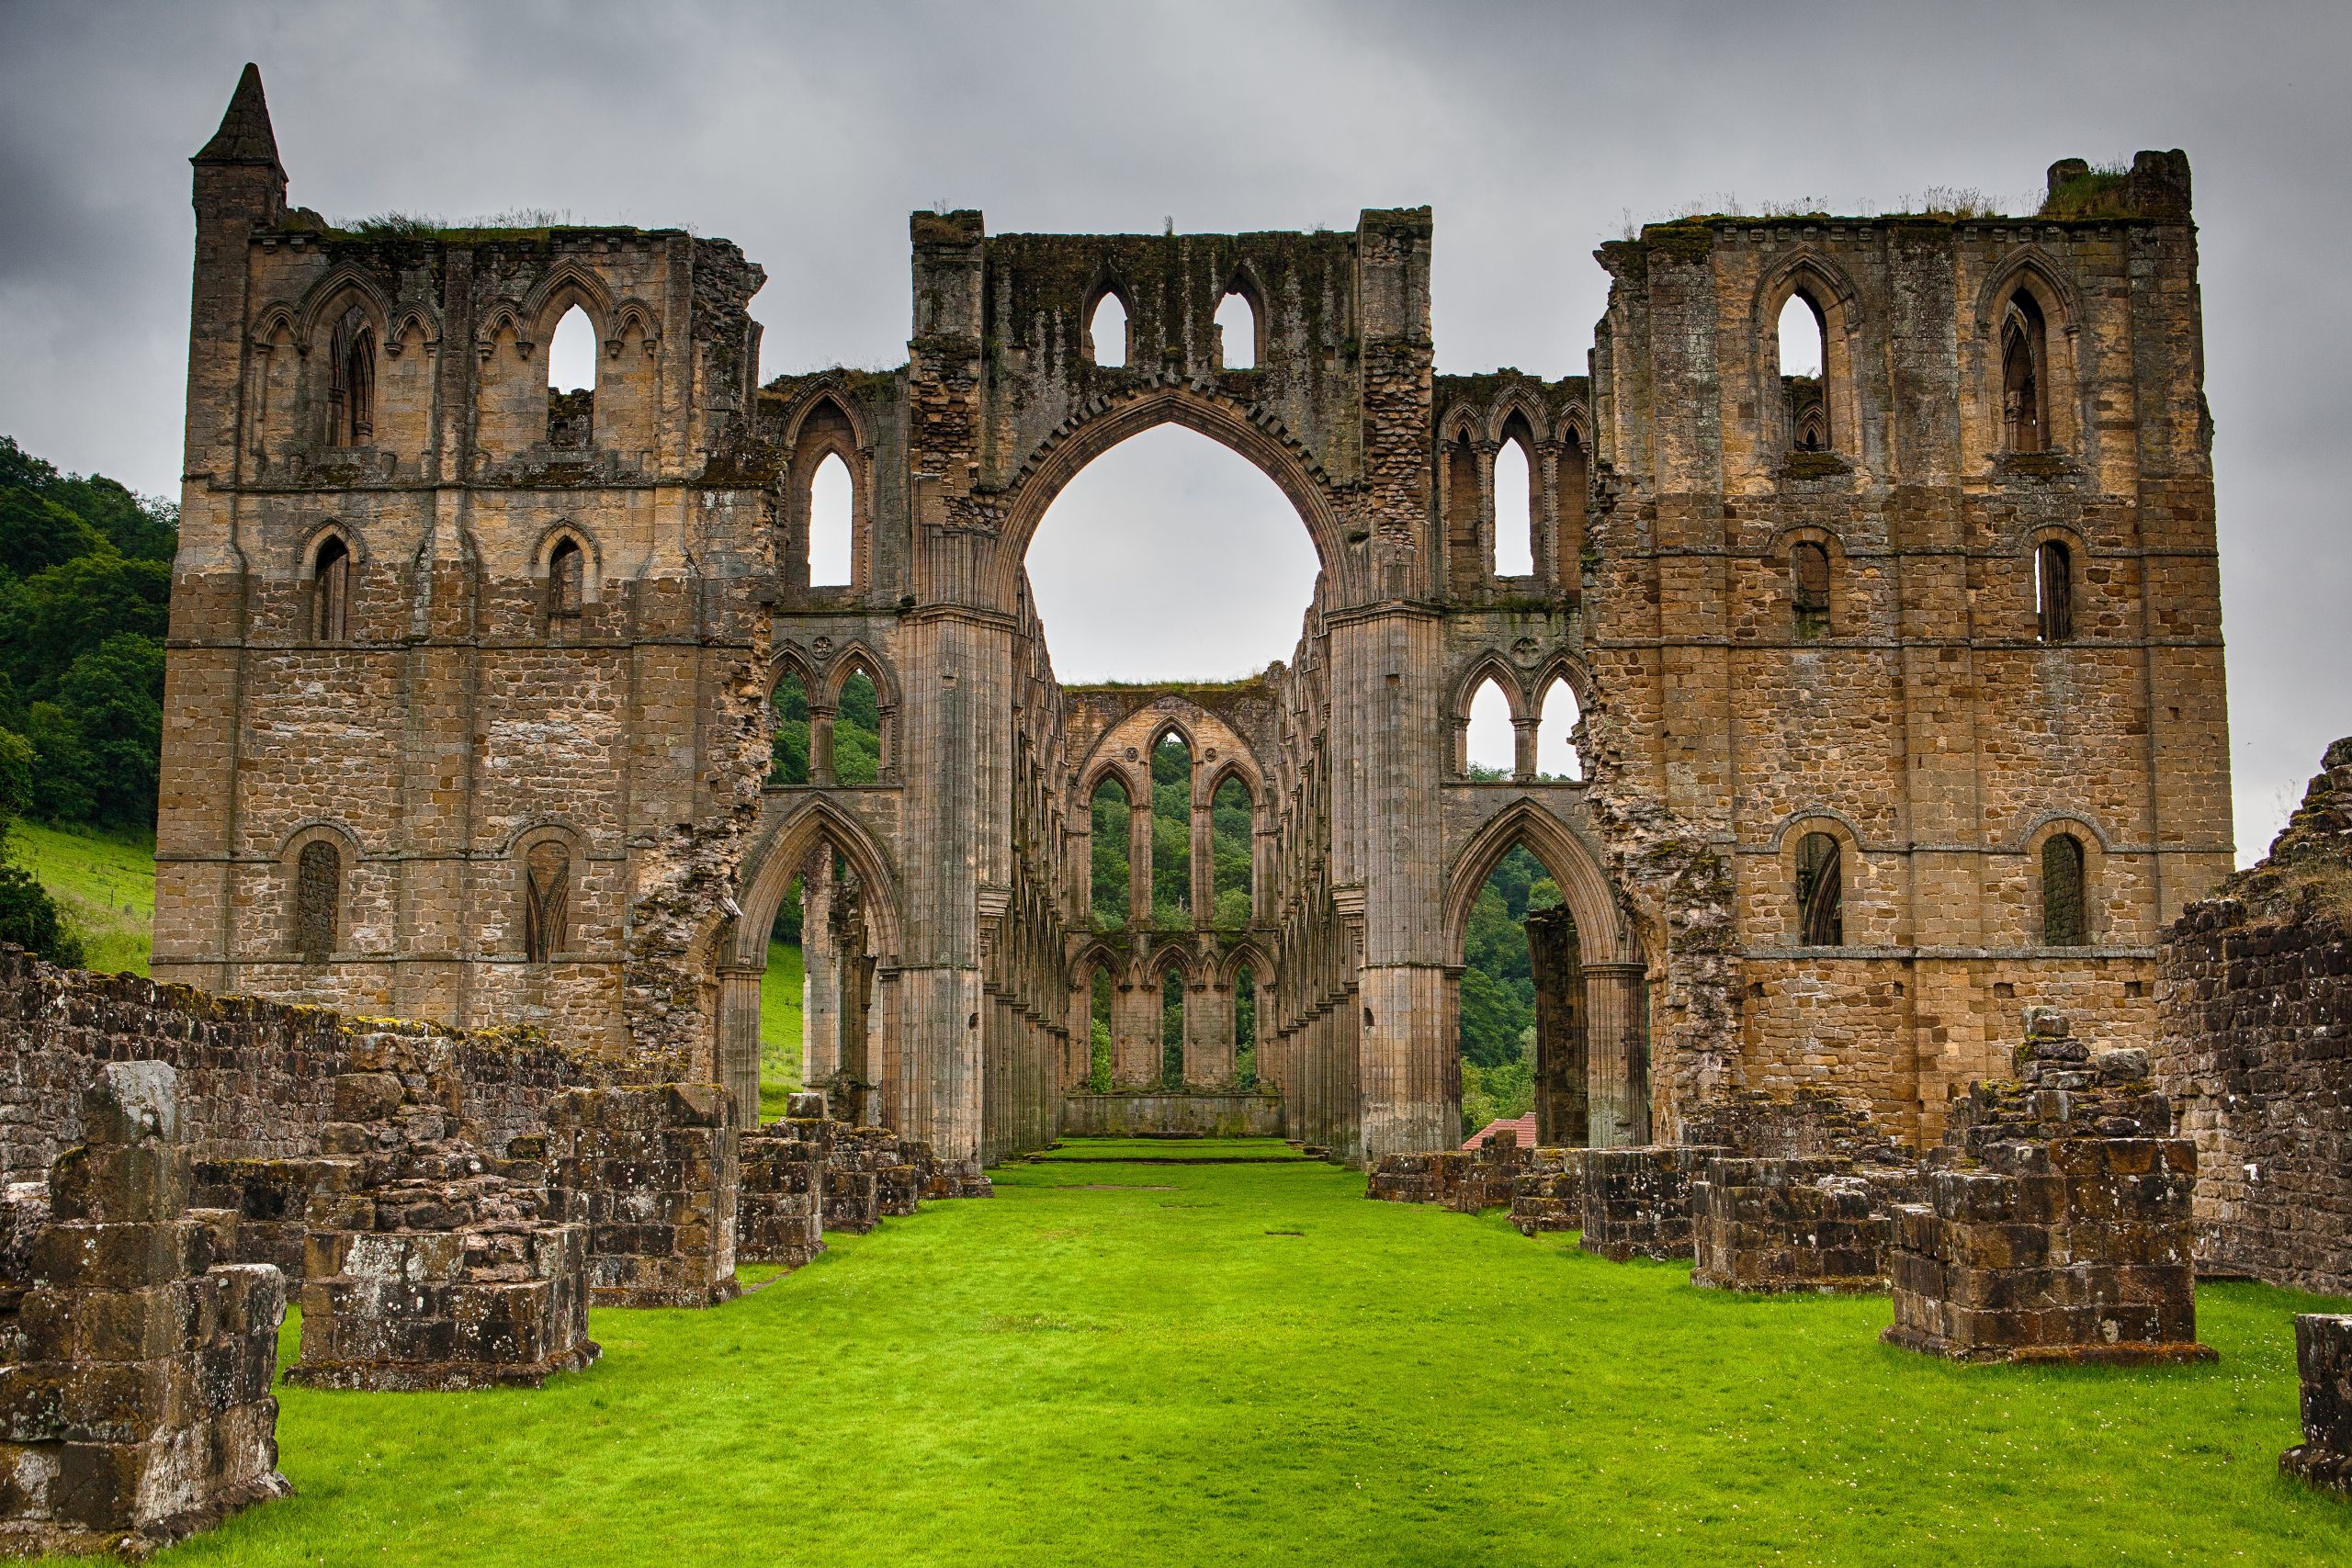 Ghost in the Stones, plot bunny, MM romance, RJ Scott, England, Ruins of famous Riveaulx Abbey